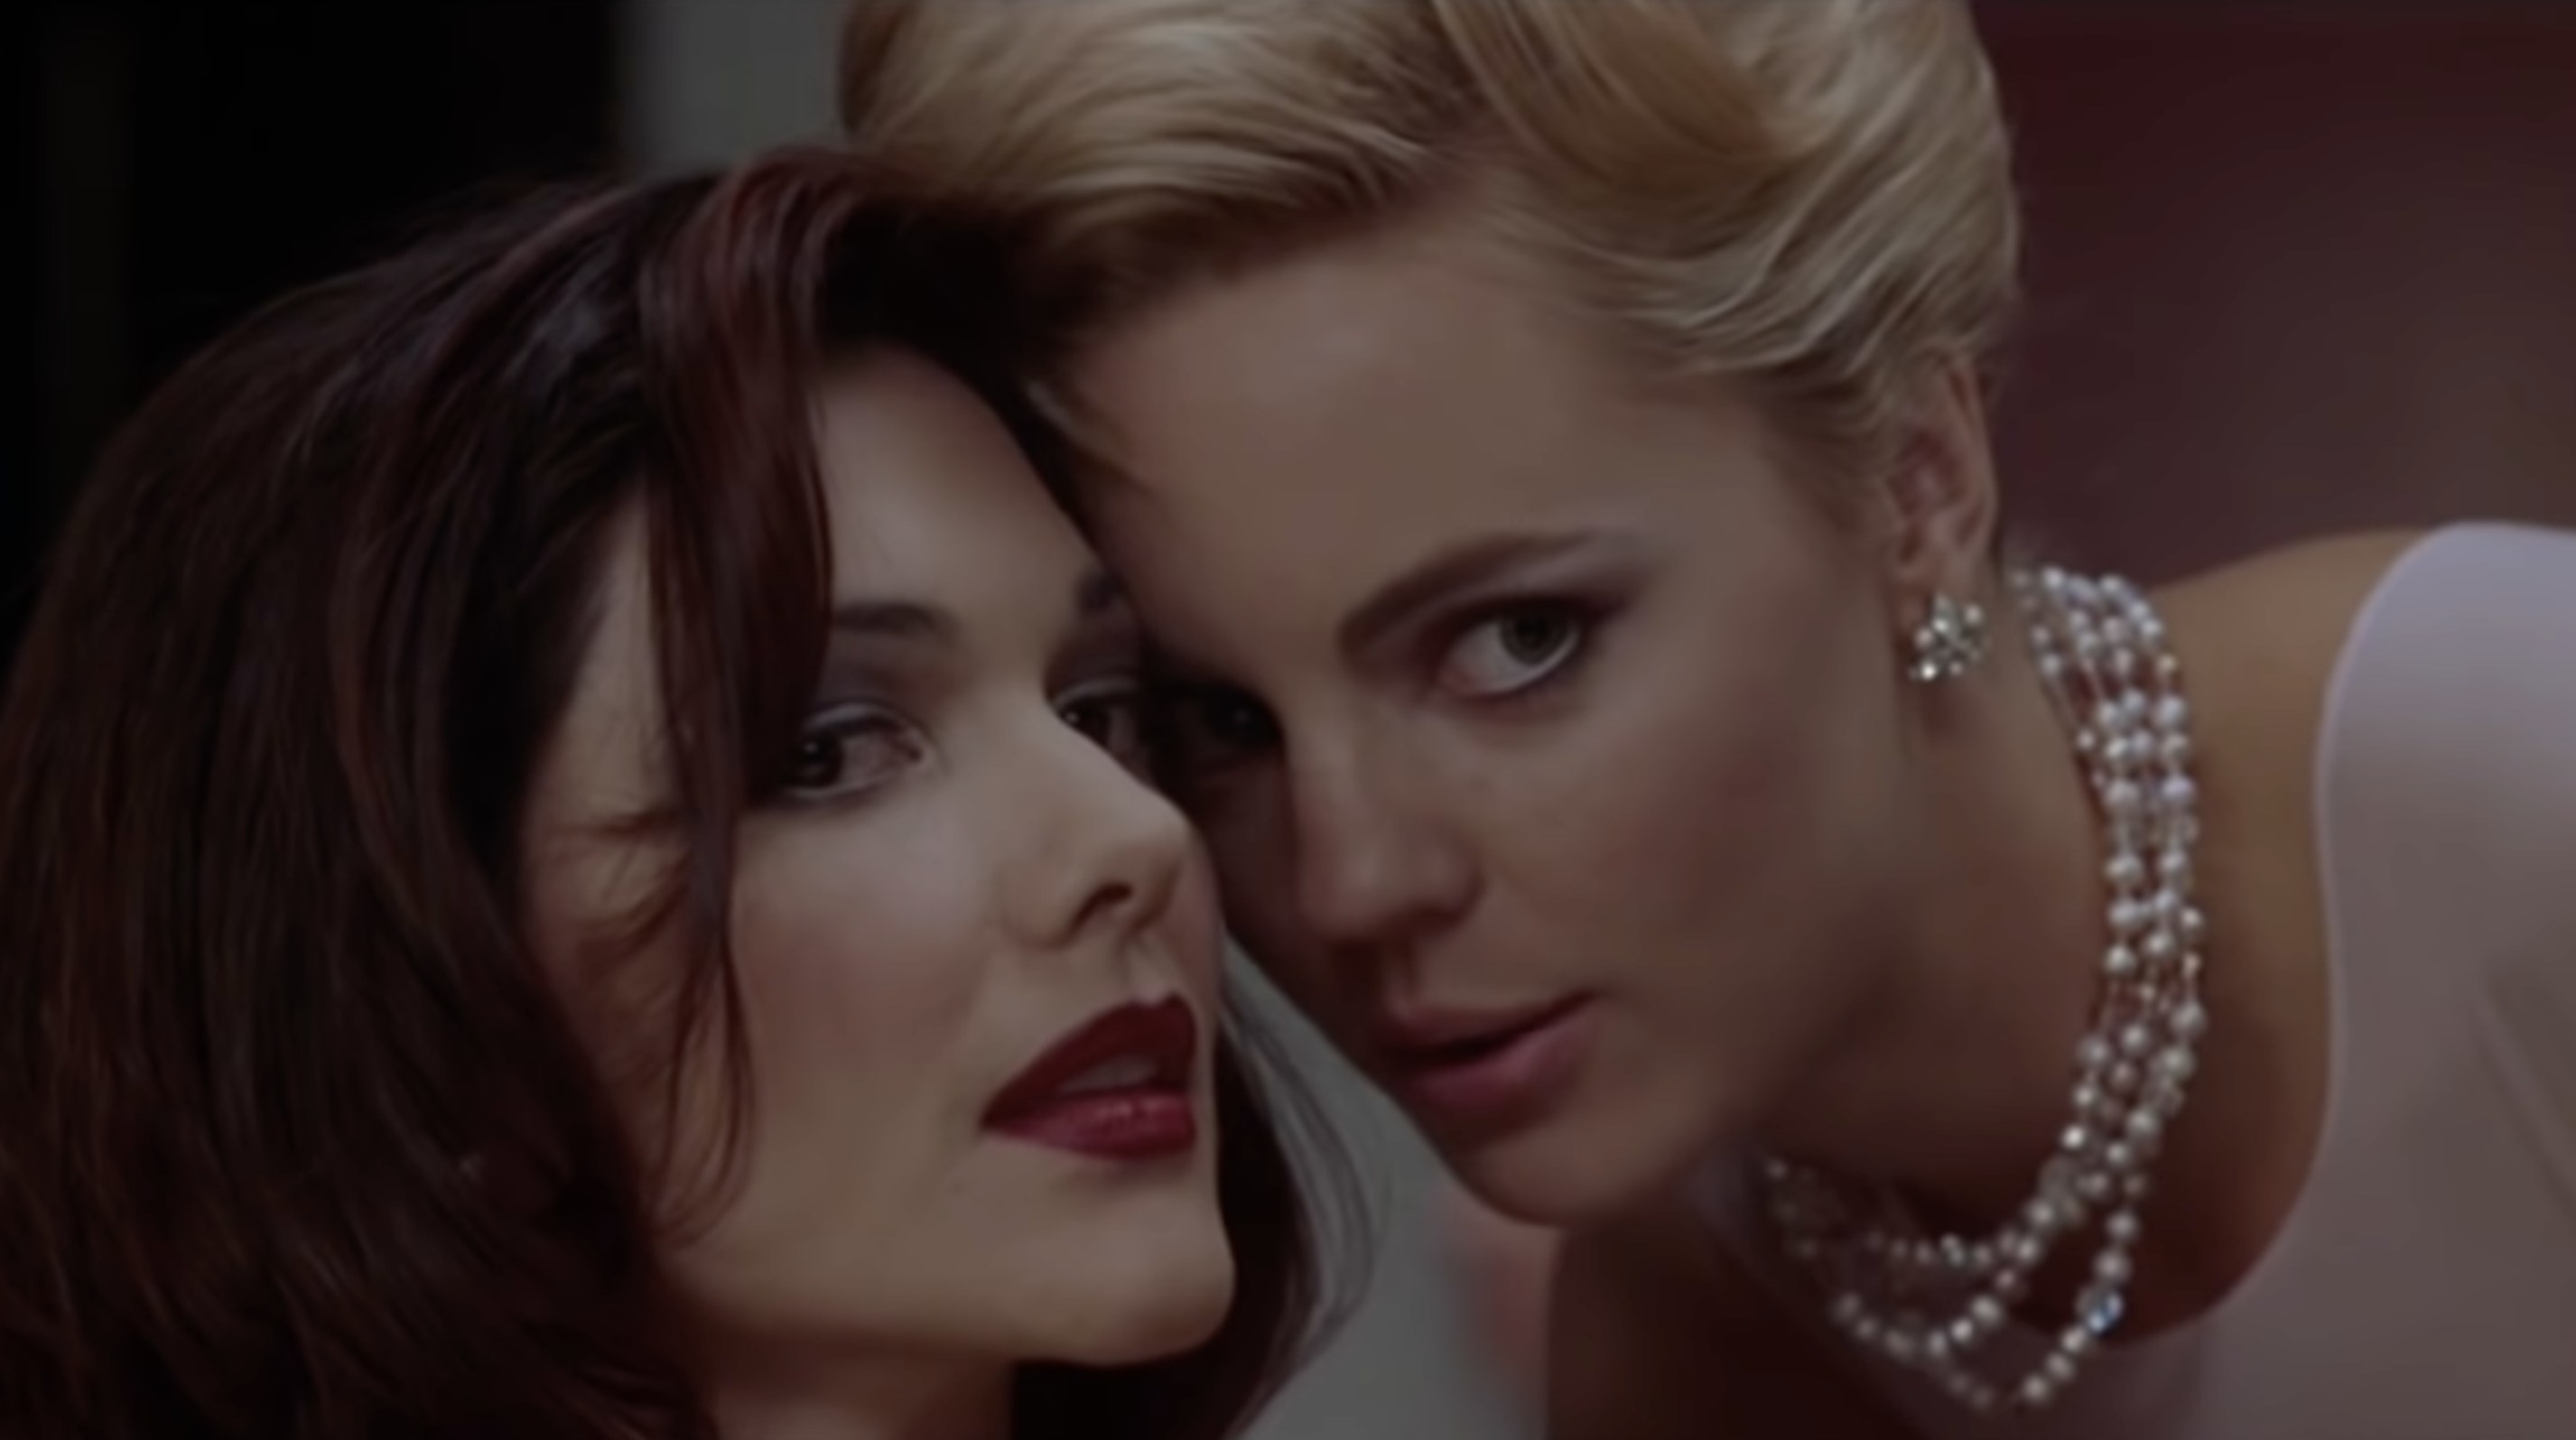 Naomi Watts and Lara Harring steal a kiss to stir up jealousy in Mulholland Drive